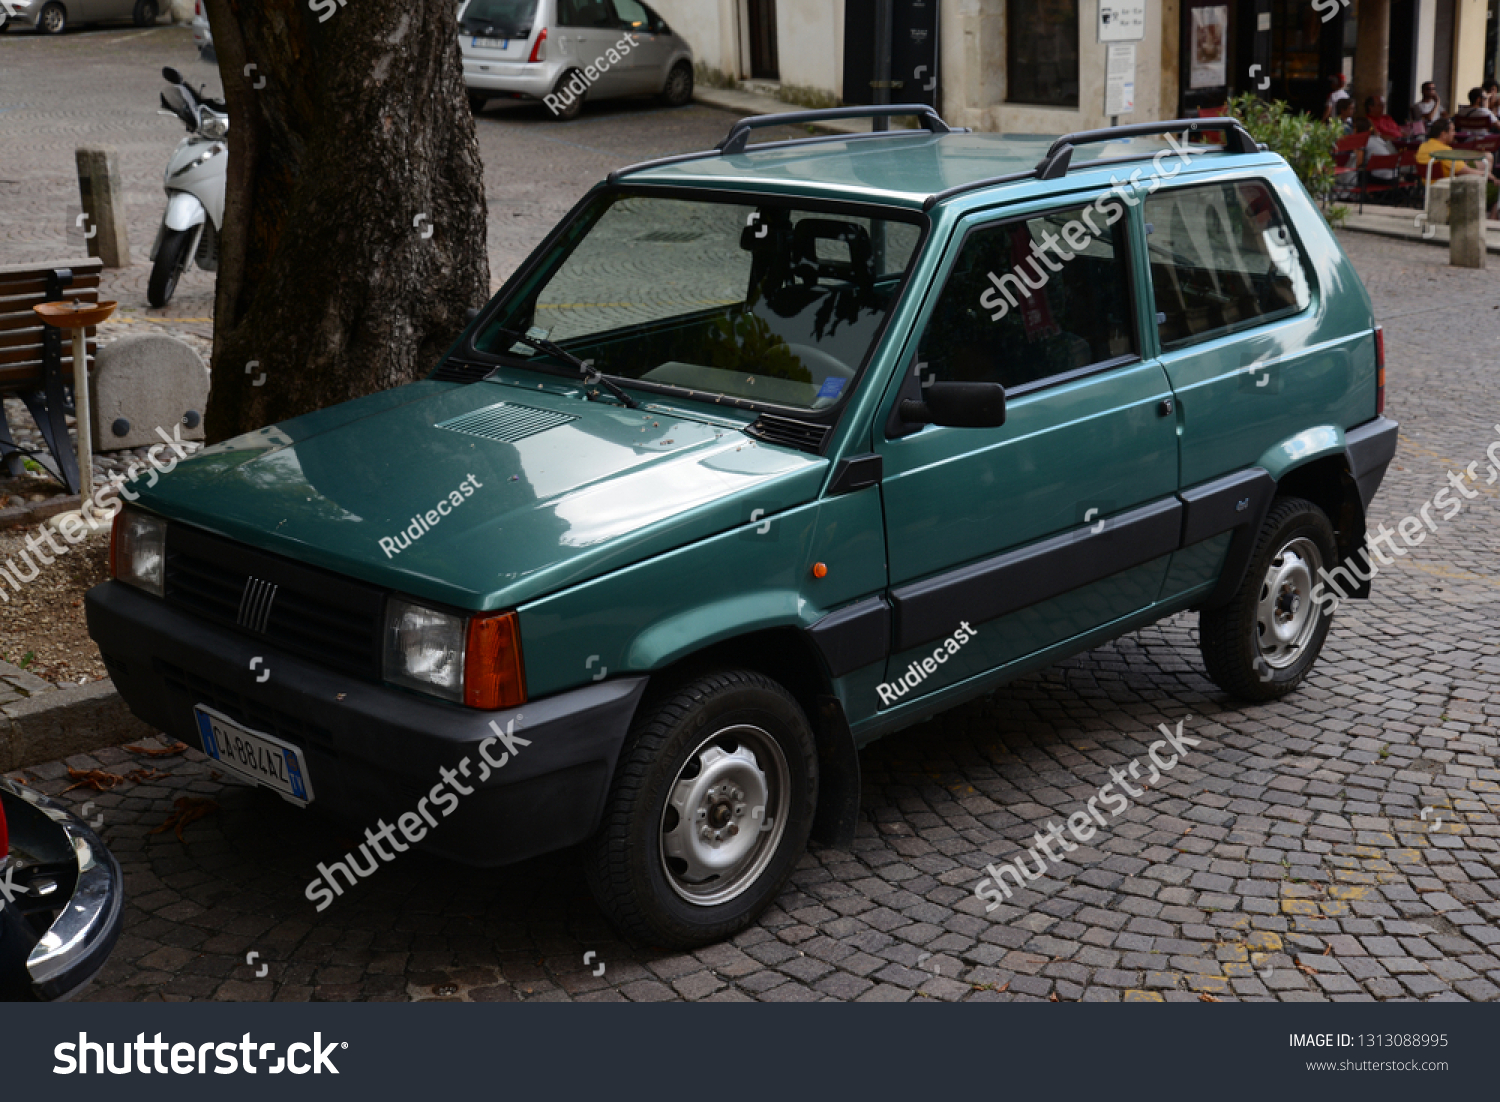 Asolo Italy August 26 2013 Fiat Stock Photo Edit Now 1313088995